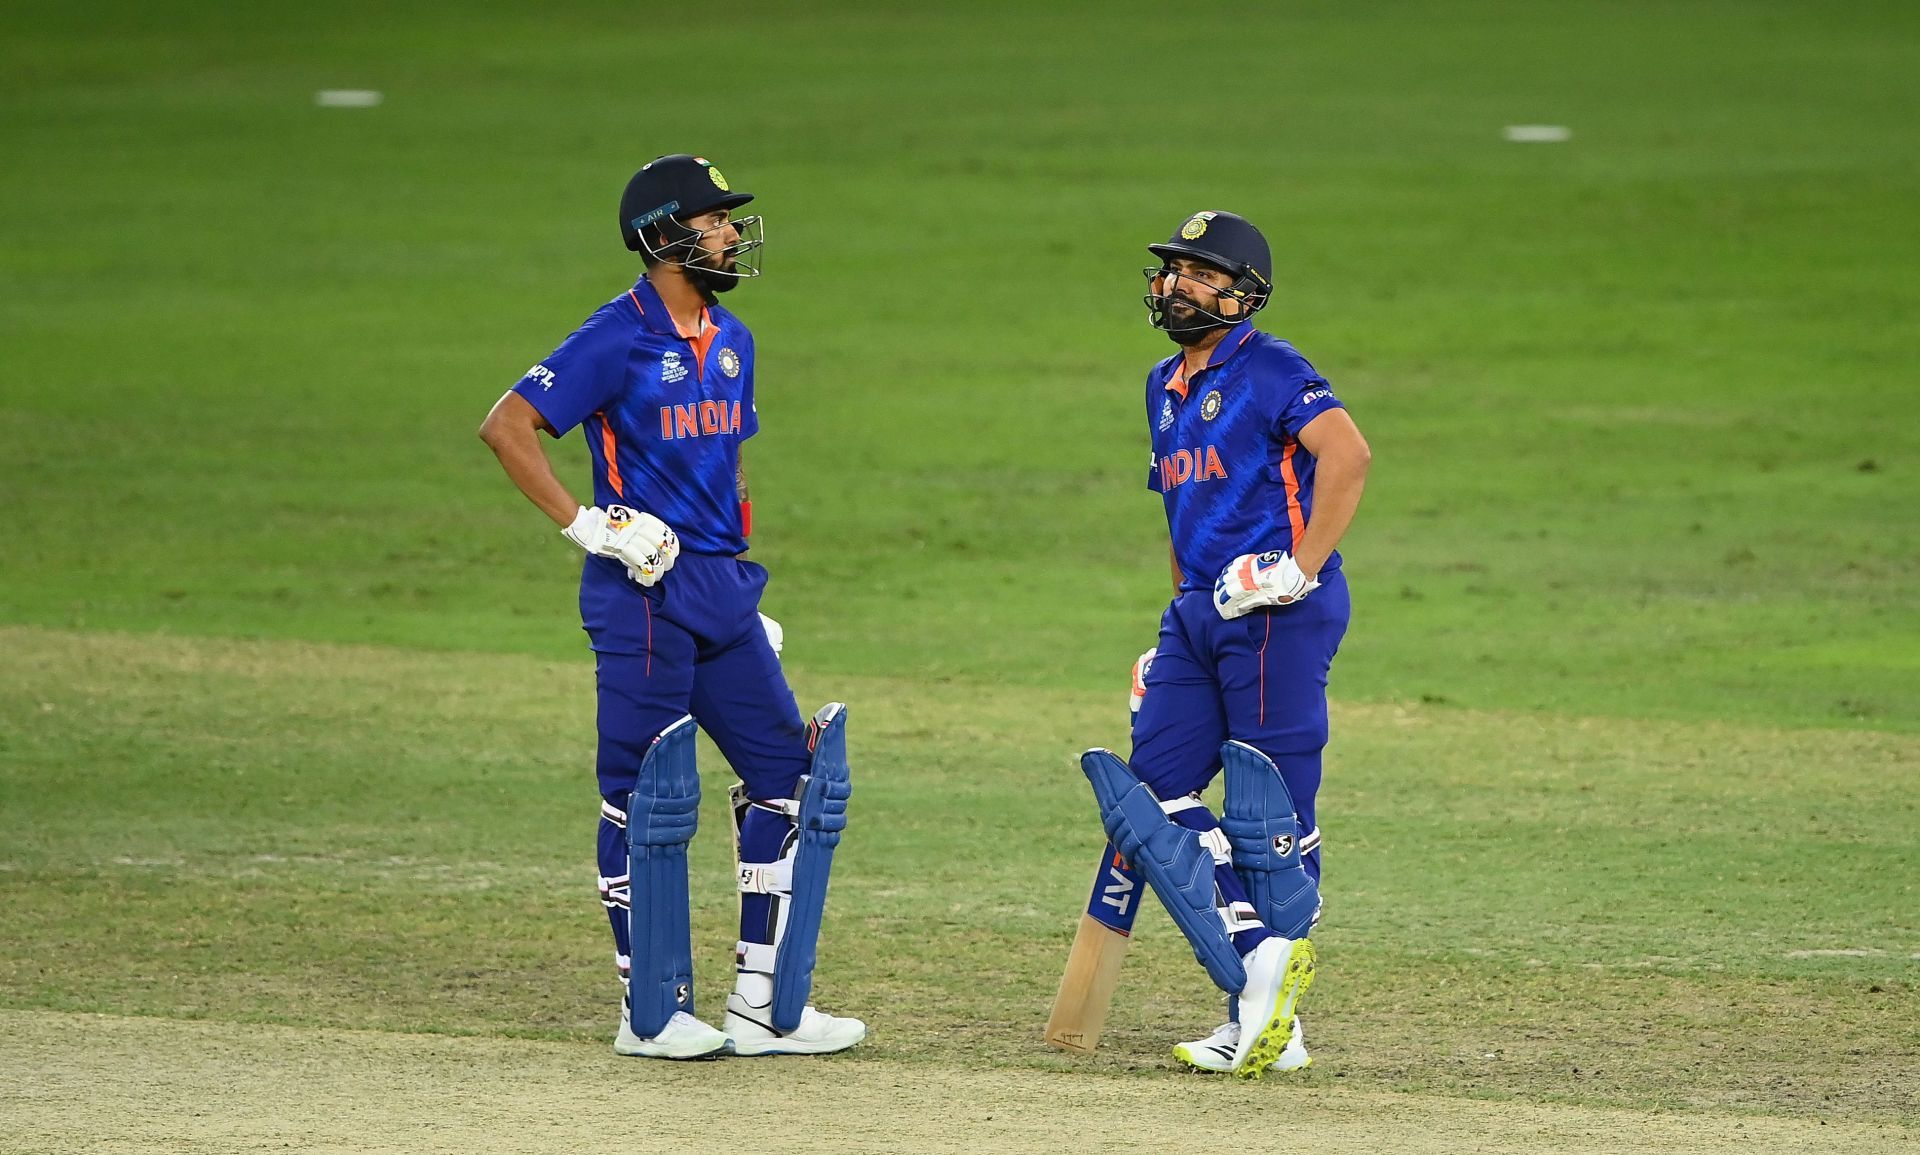 KL Rahul and Rohit Sharma are likely to open the batting in the second ODI against West Indies